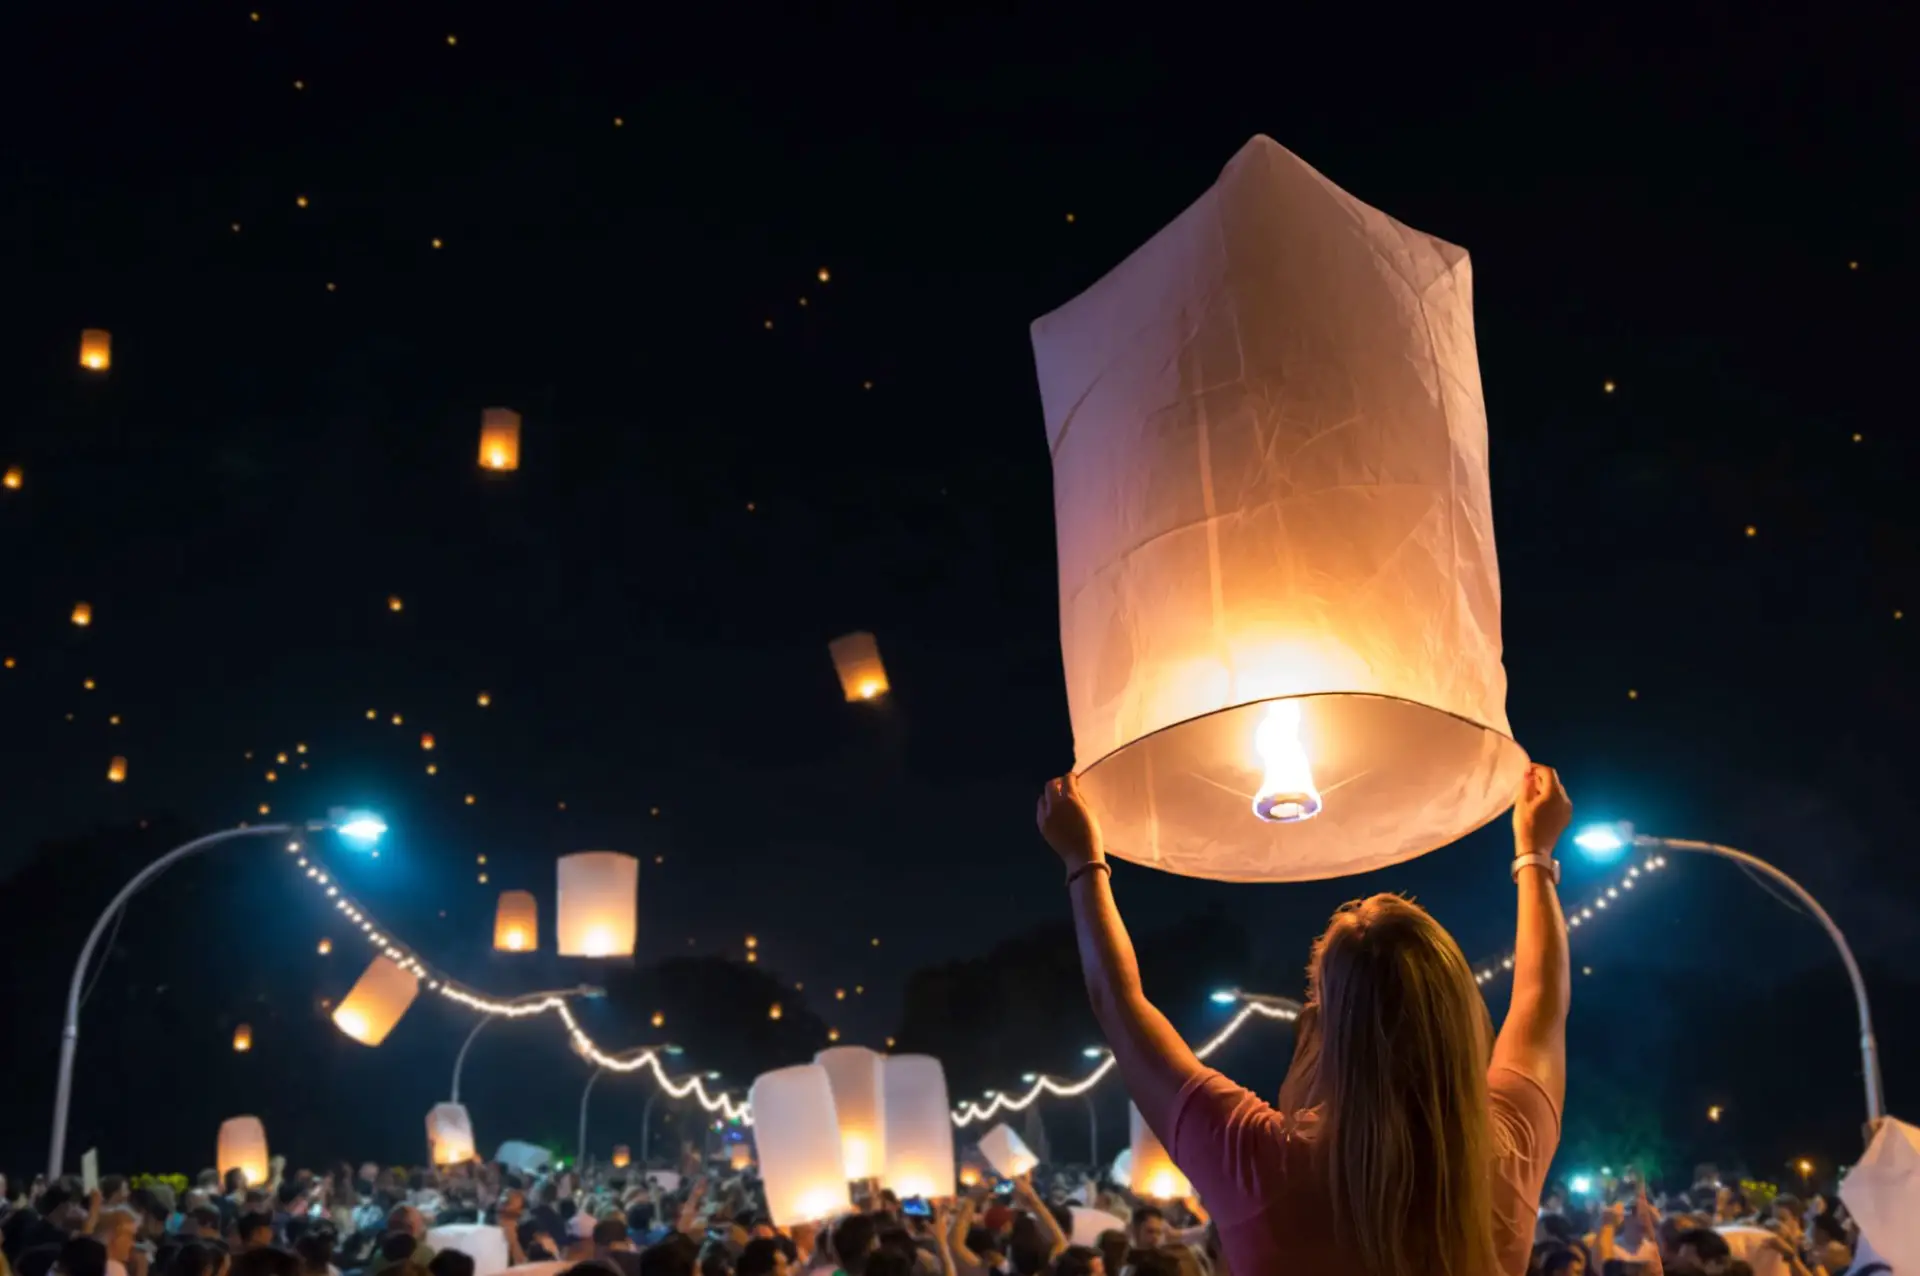 Sky Lanterns Are Bad For the Environment